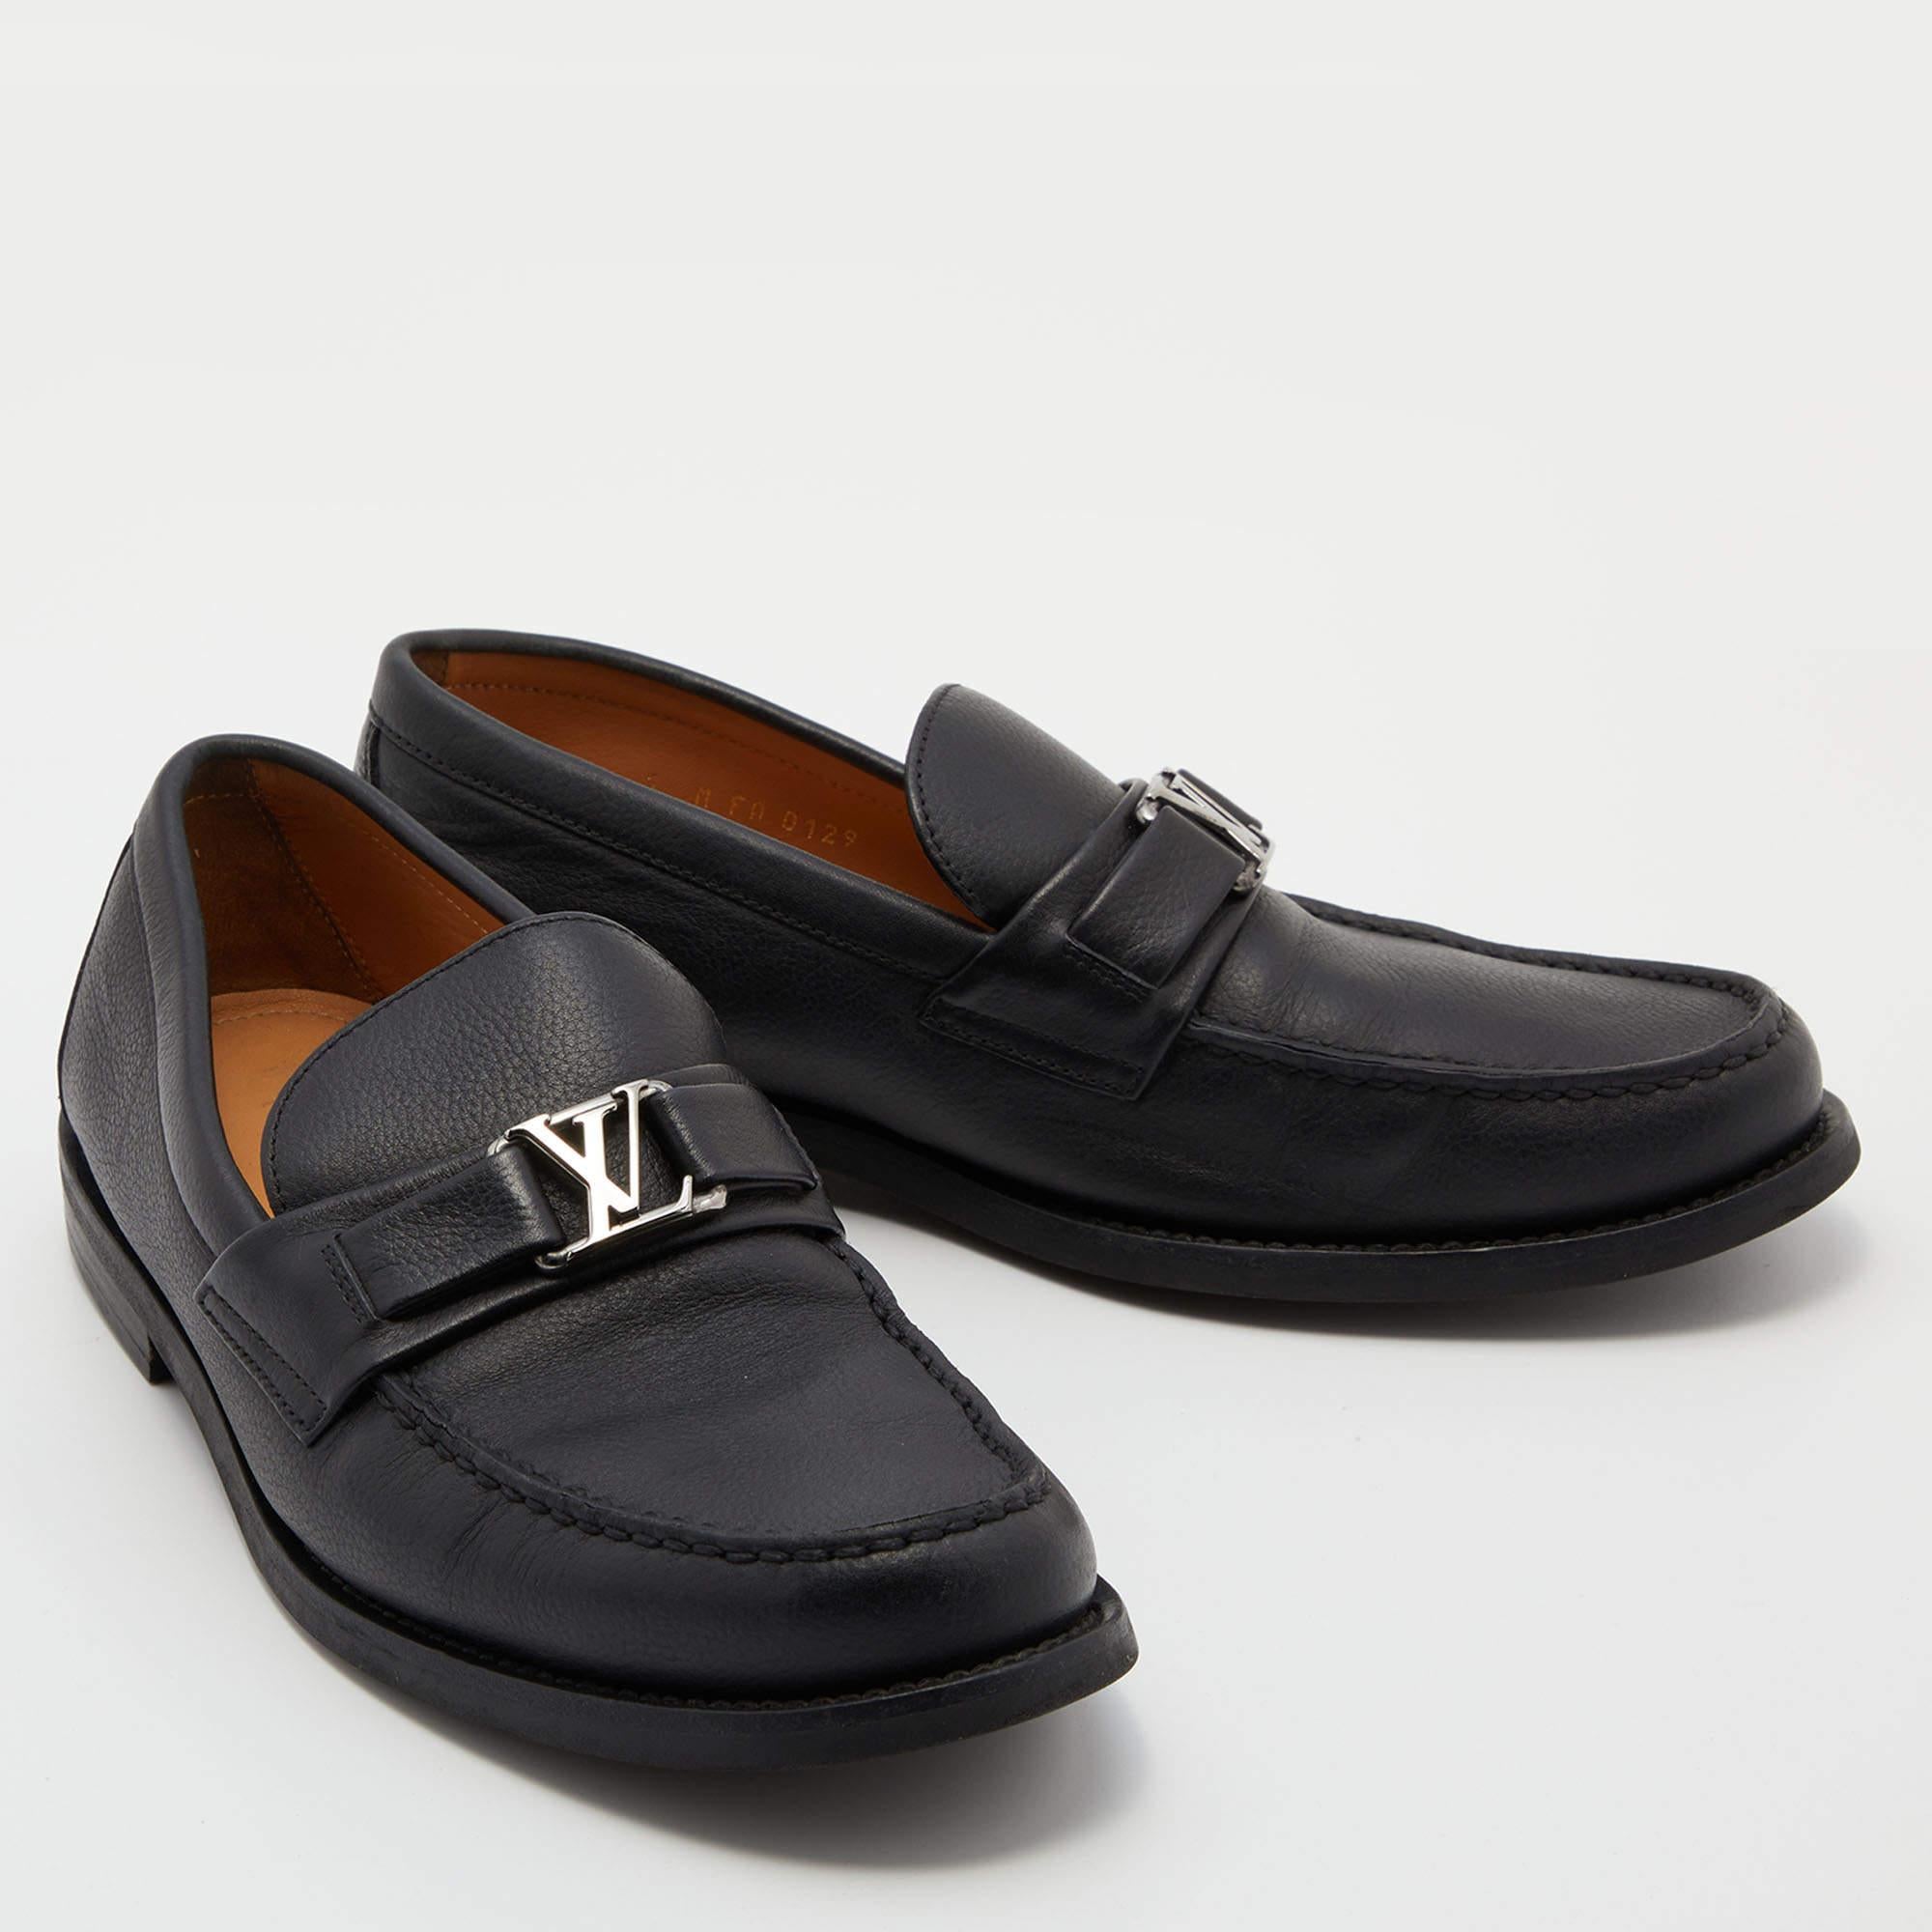 Louis Vuitton Black Leather Major Slip On Loafers Size 40 1